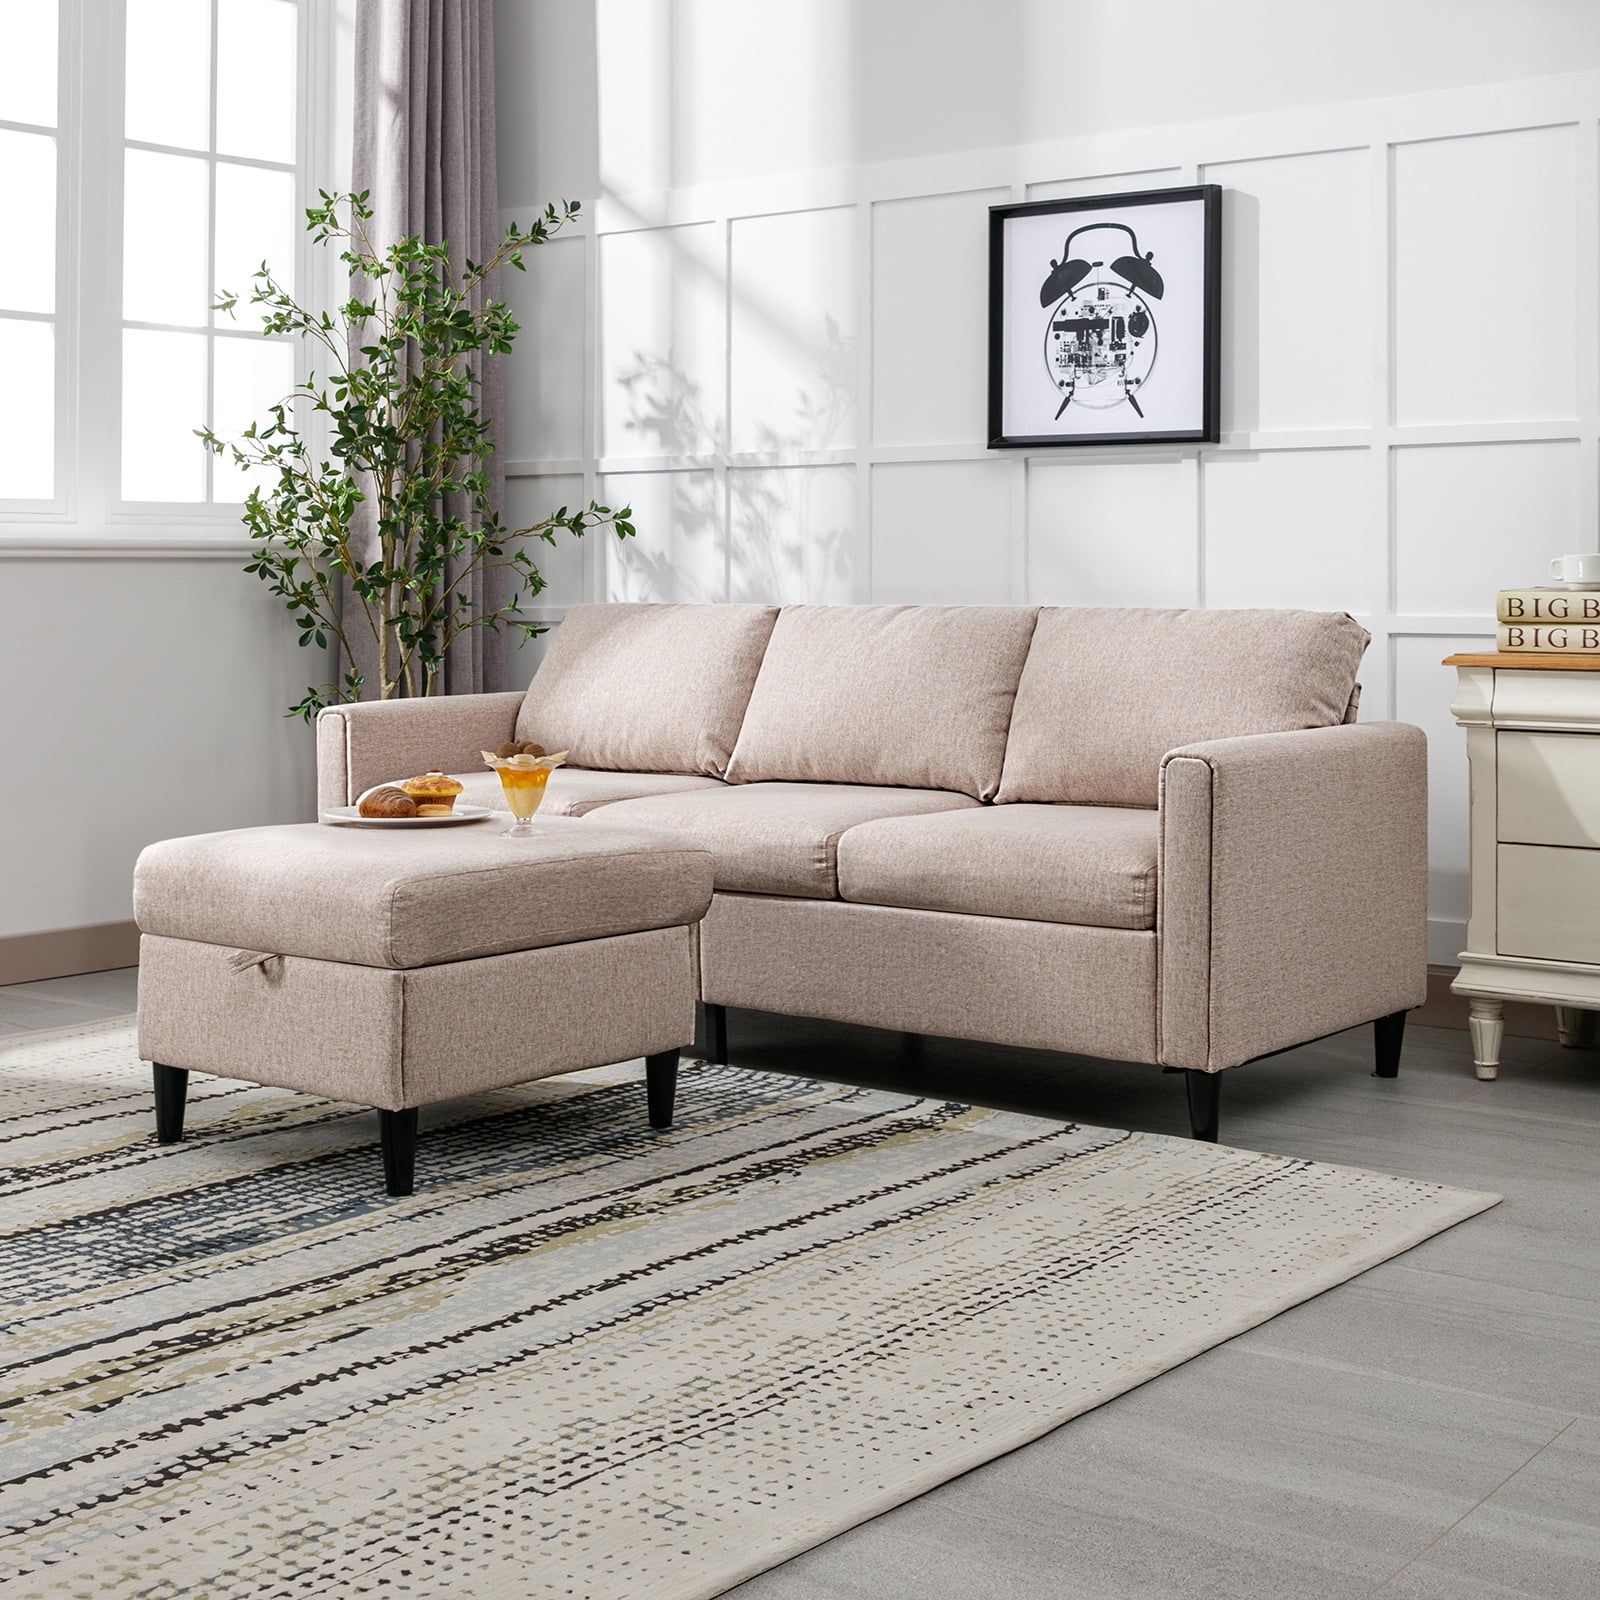 Zafly Convertible Sectional Sofa Couch, 3 Seat Upholstered Sofa With  Flexible Storage Ottoman Chaise, Modern Modular L Shape Couches For Living  Room/office – Beige – Walmart In Beige L Shaped Sectional Sofas (View 9 of 15)